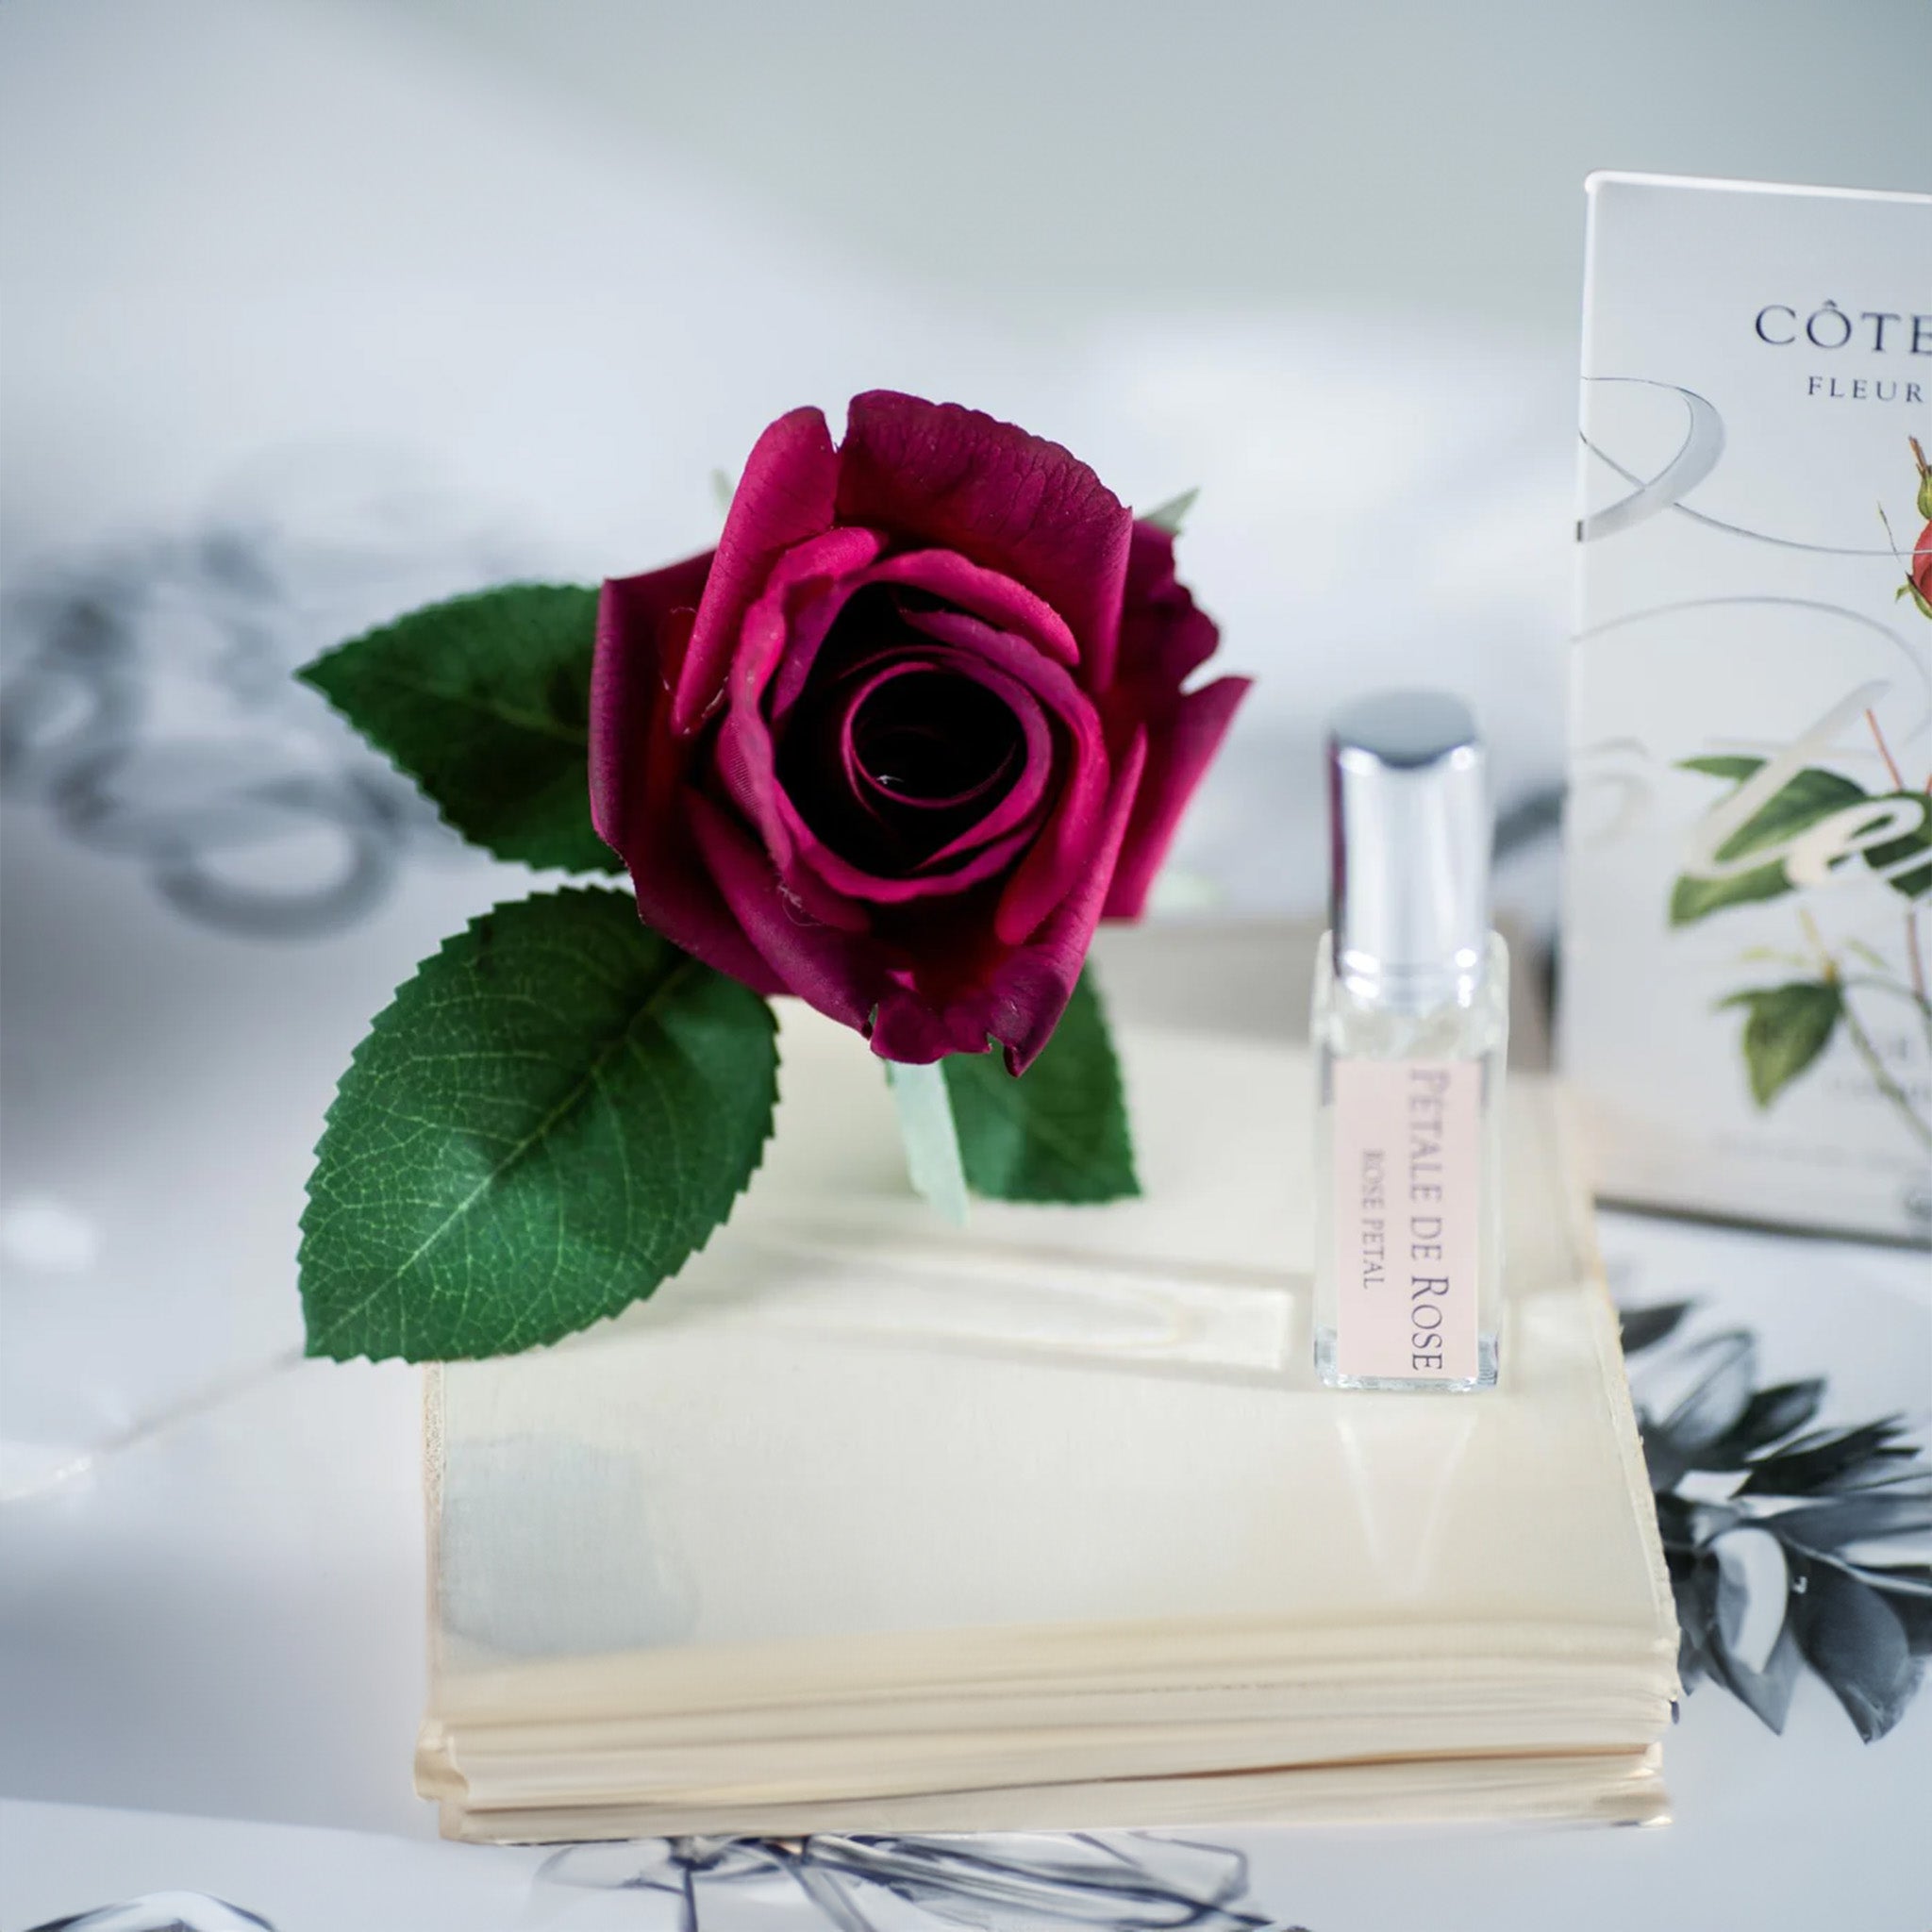 A carmine red rosebud on an open book with a clear perfume vial and a white 'CÔTE NOIRE' box in a soft-focus background.